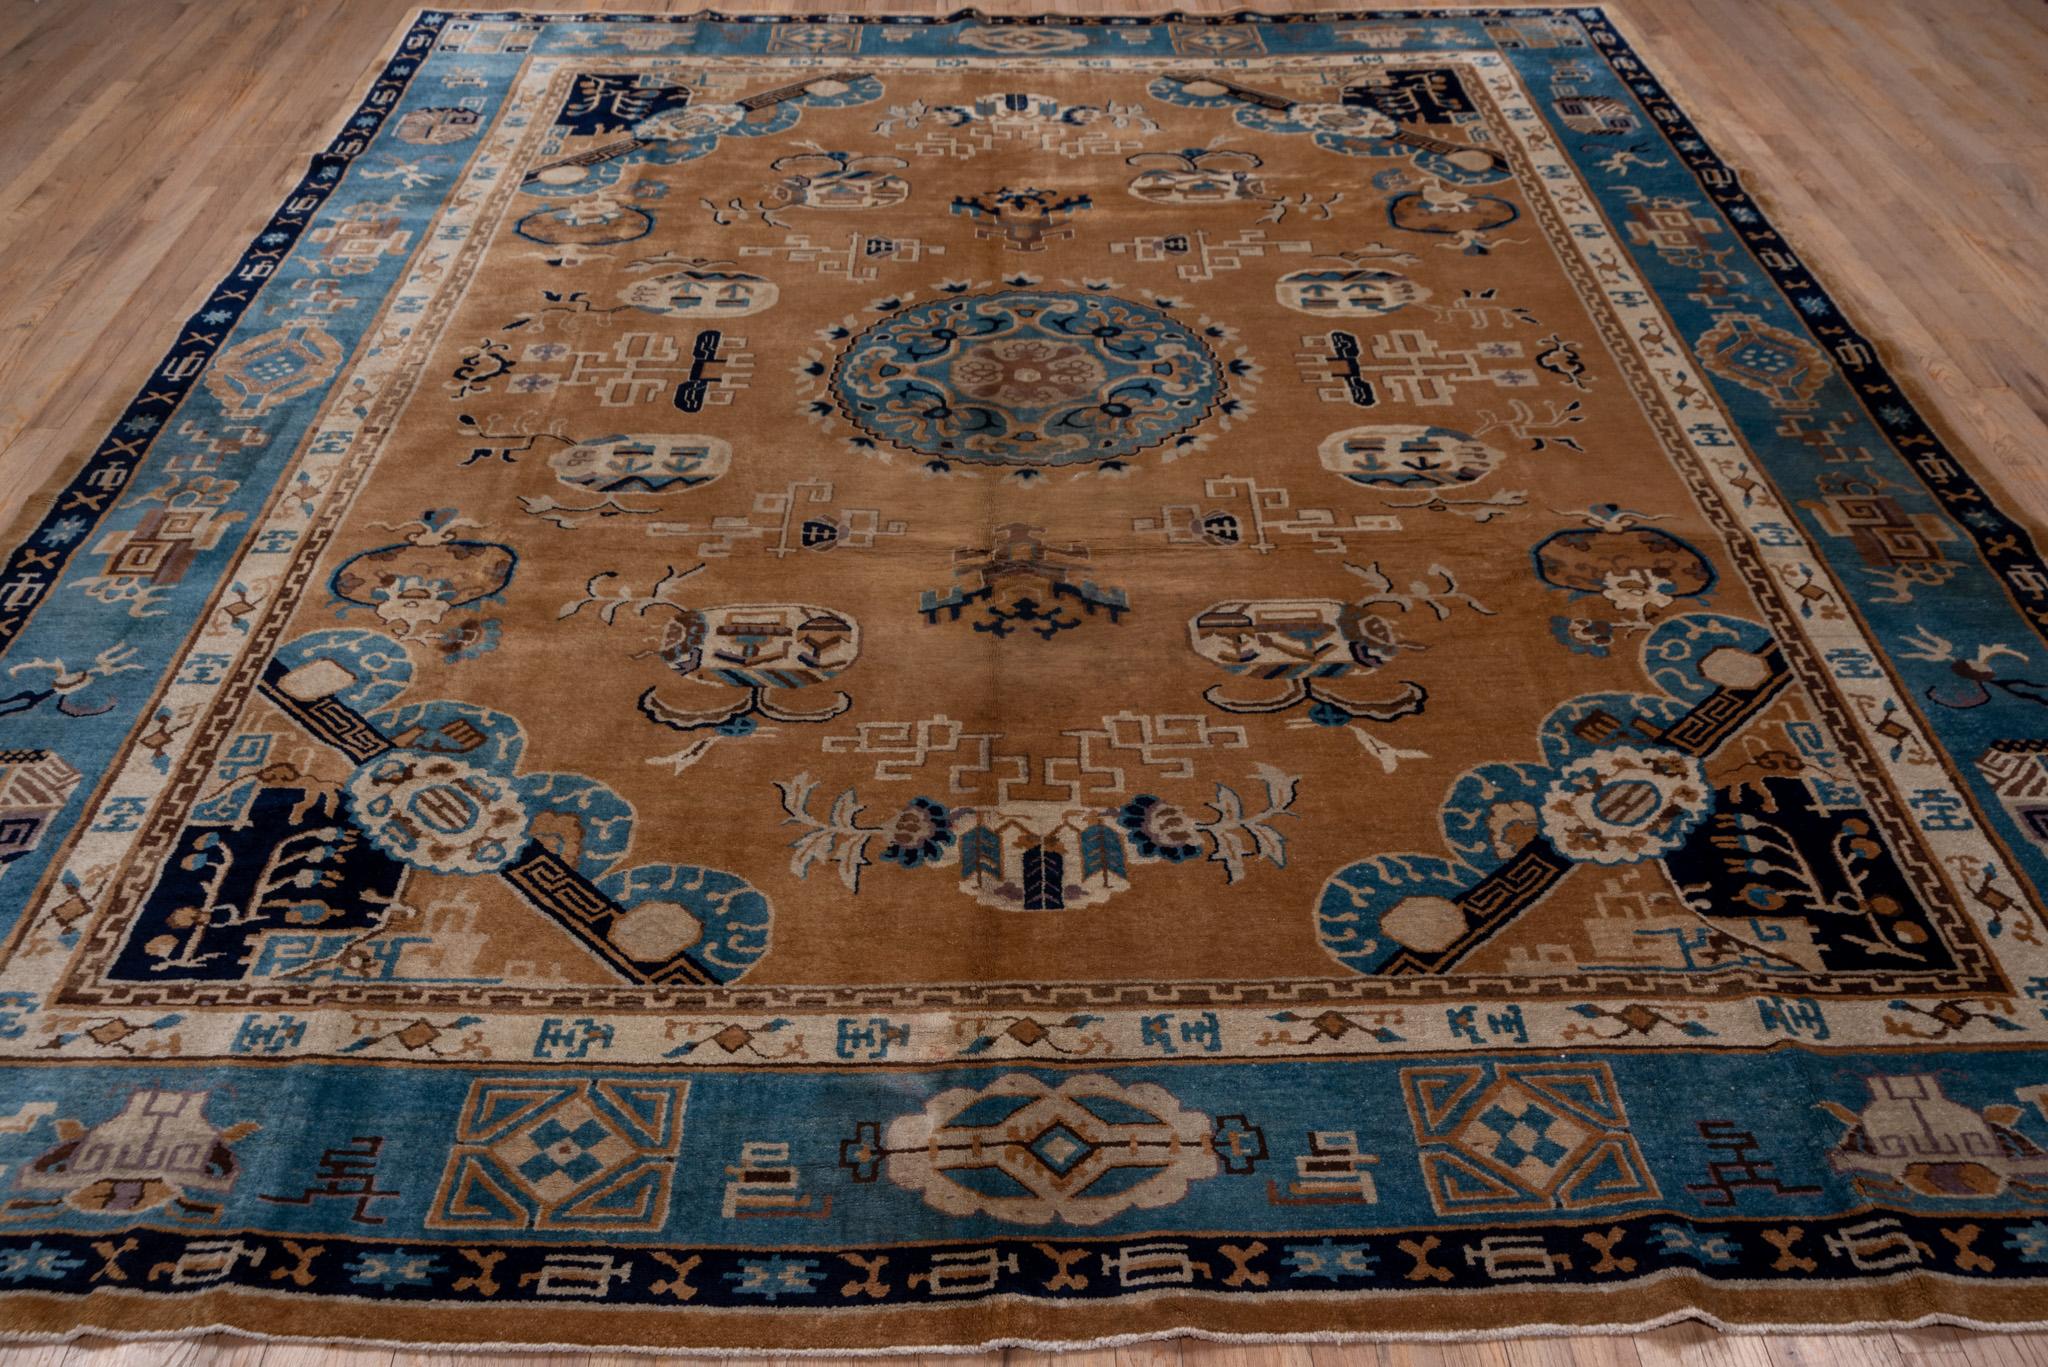 A Chinese Rug circa 1920. Hand knotted, made of 100% wool yarn.